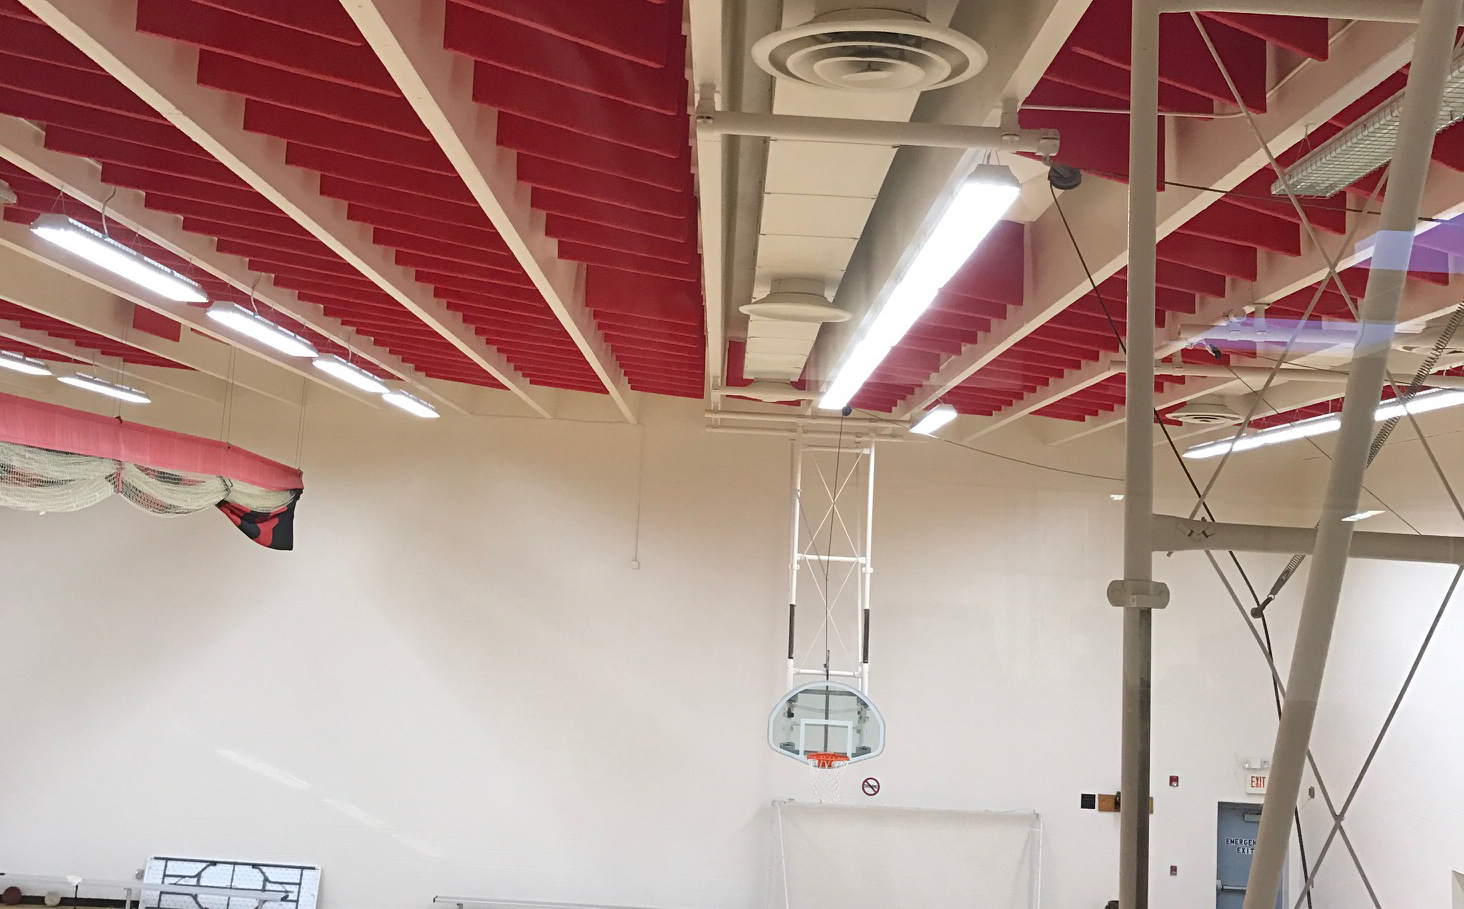 sound baffles reduce echoes for gym soundproofing